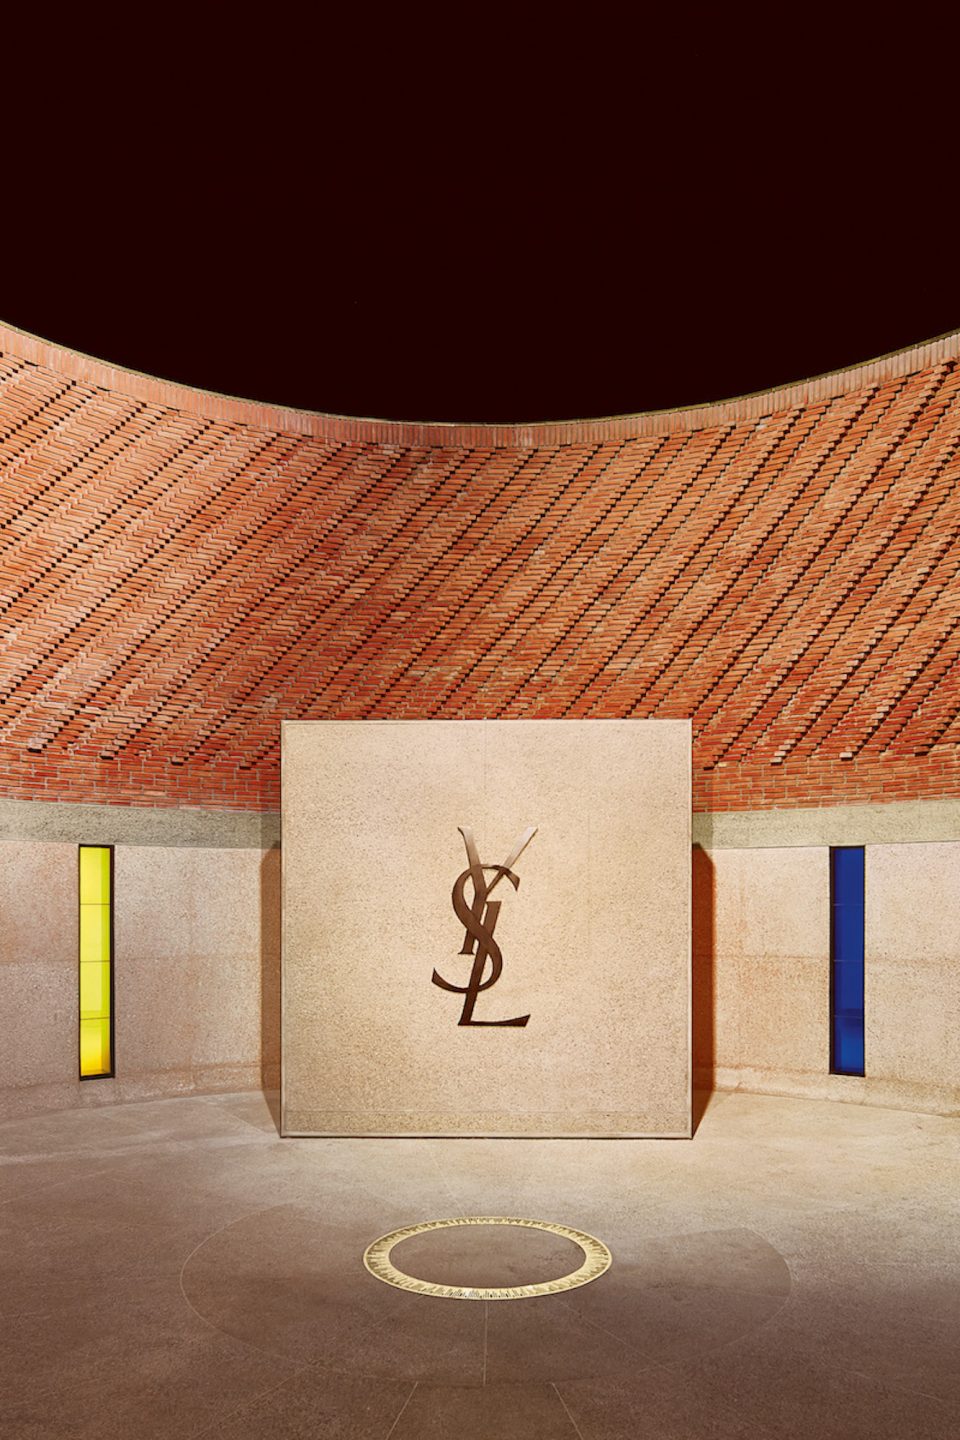 Follow Studio KO’s Journey to Realize the Yves Saint Laurent Museum in Marrakech